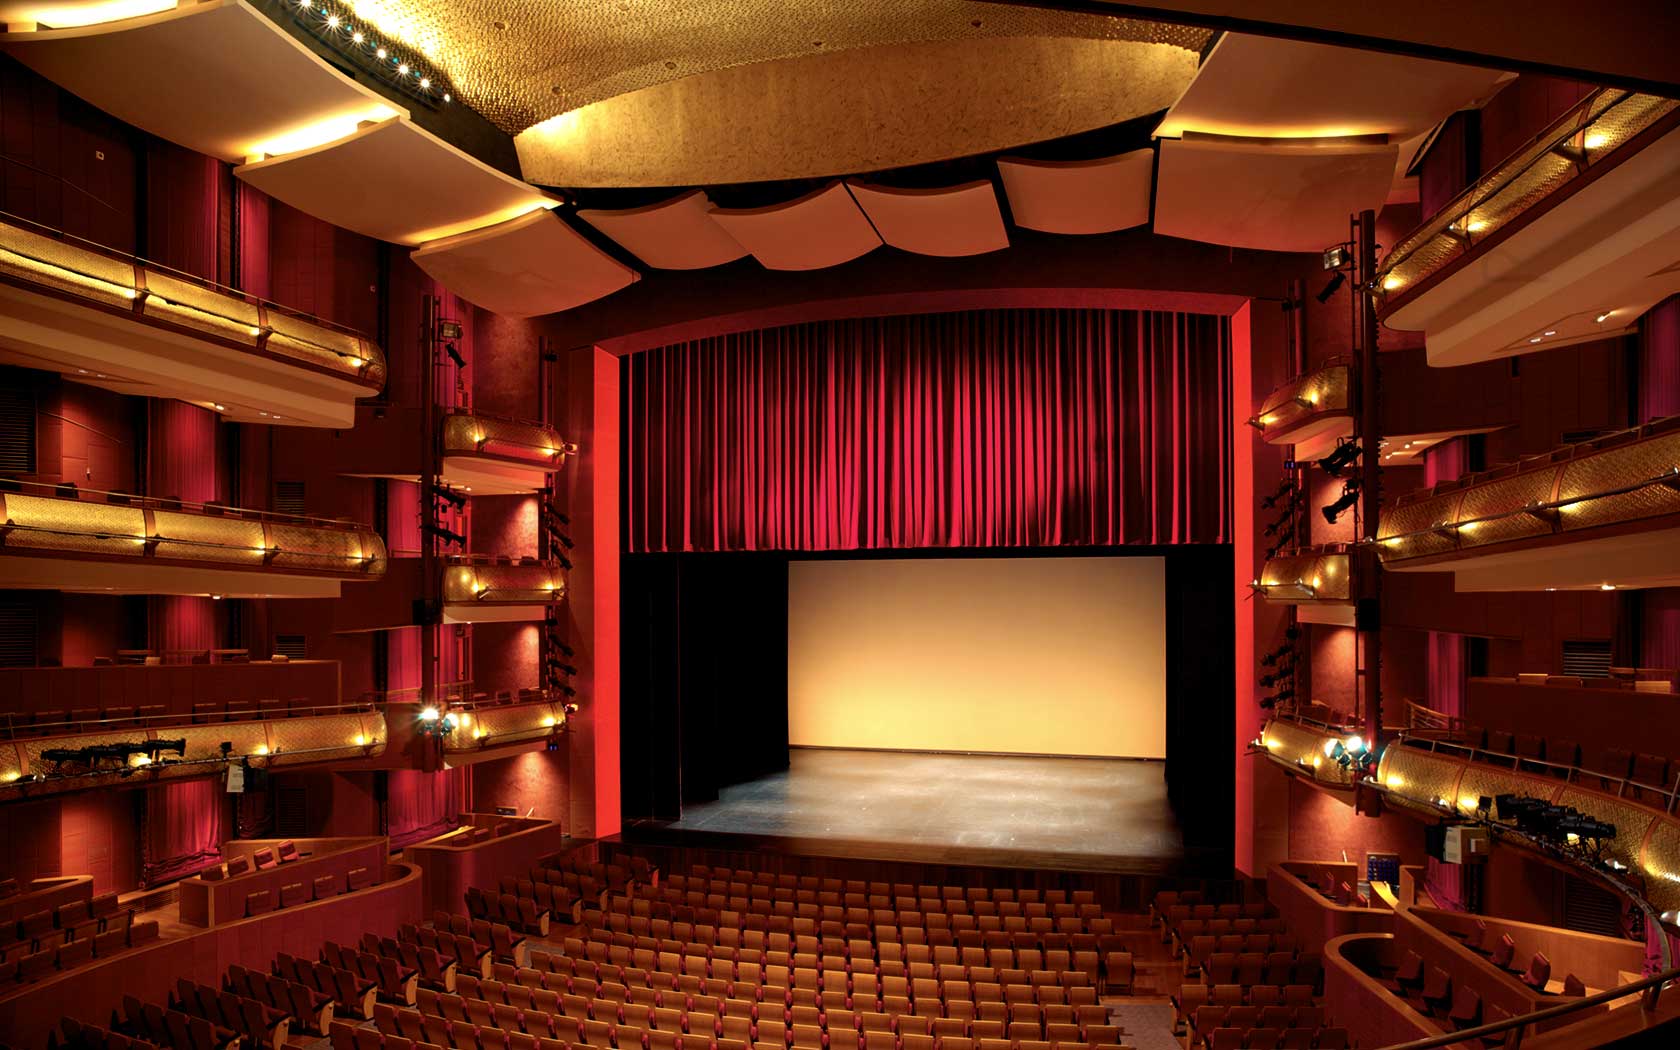 20-intriguing-facts-about-esplanade-theatres-on-the-bay